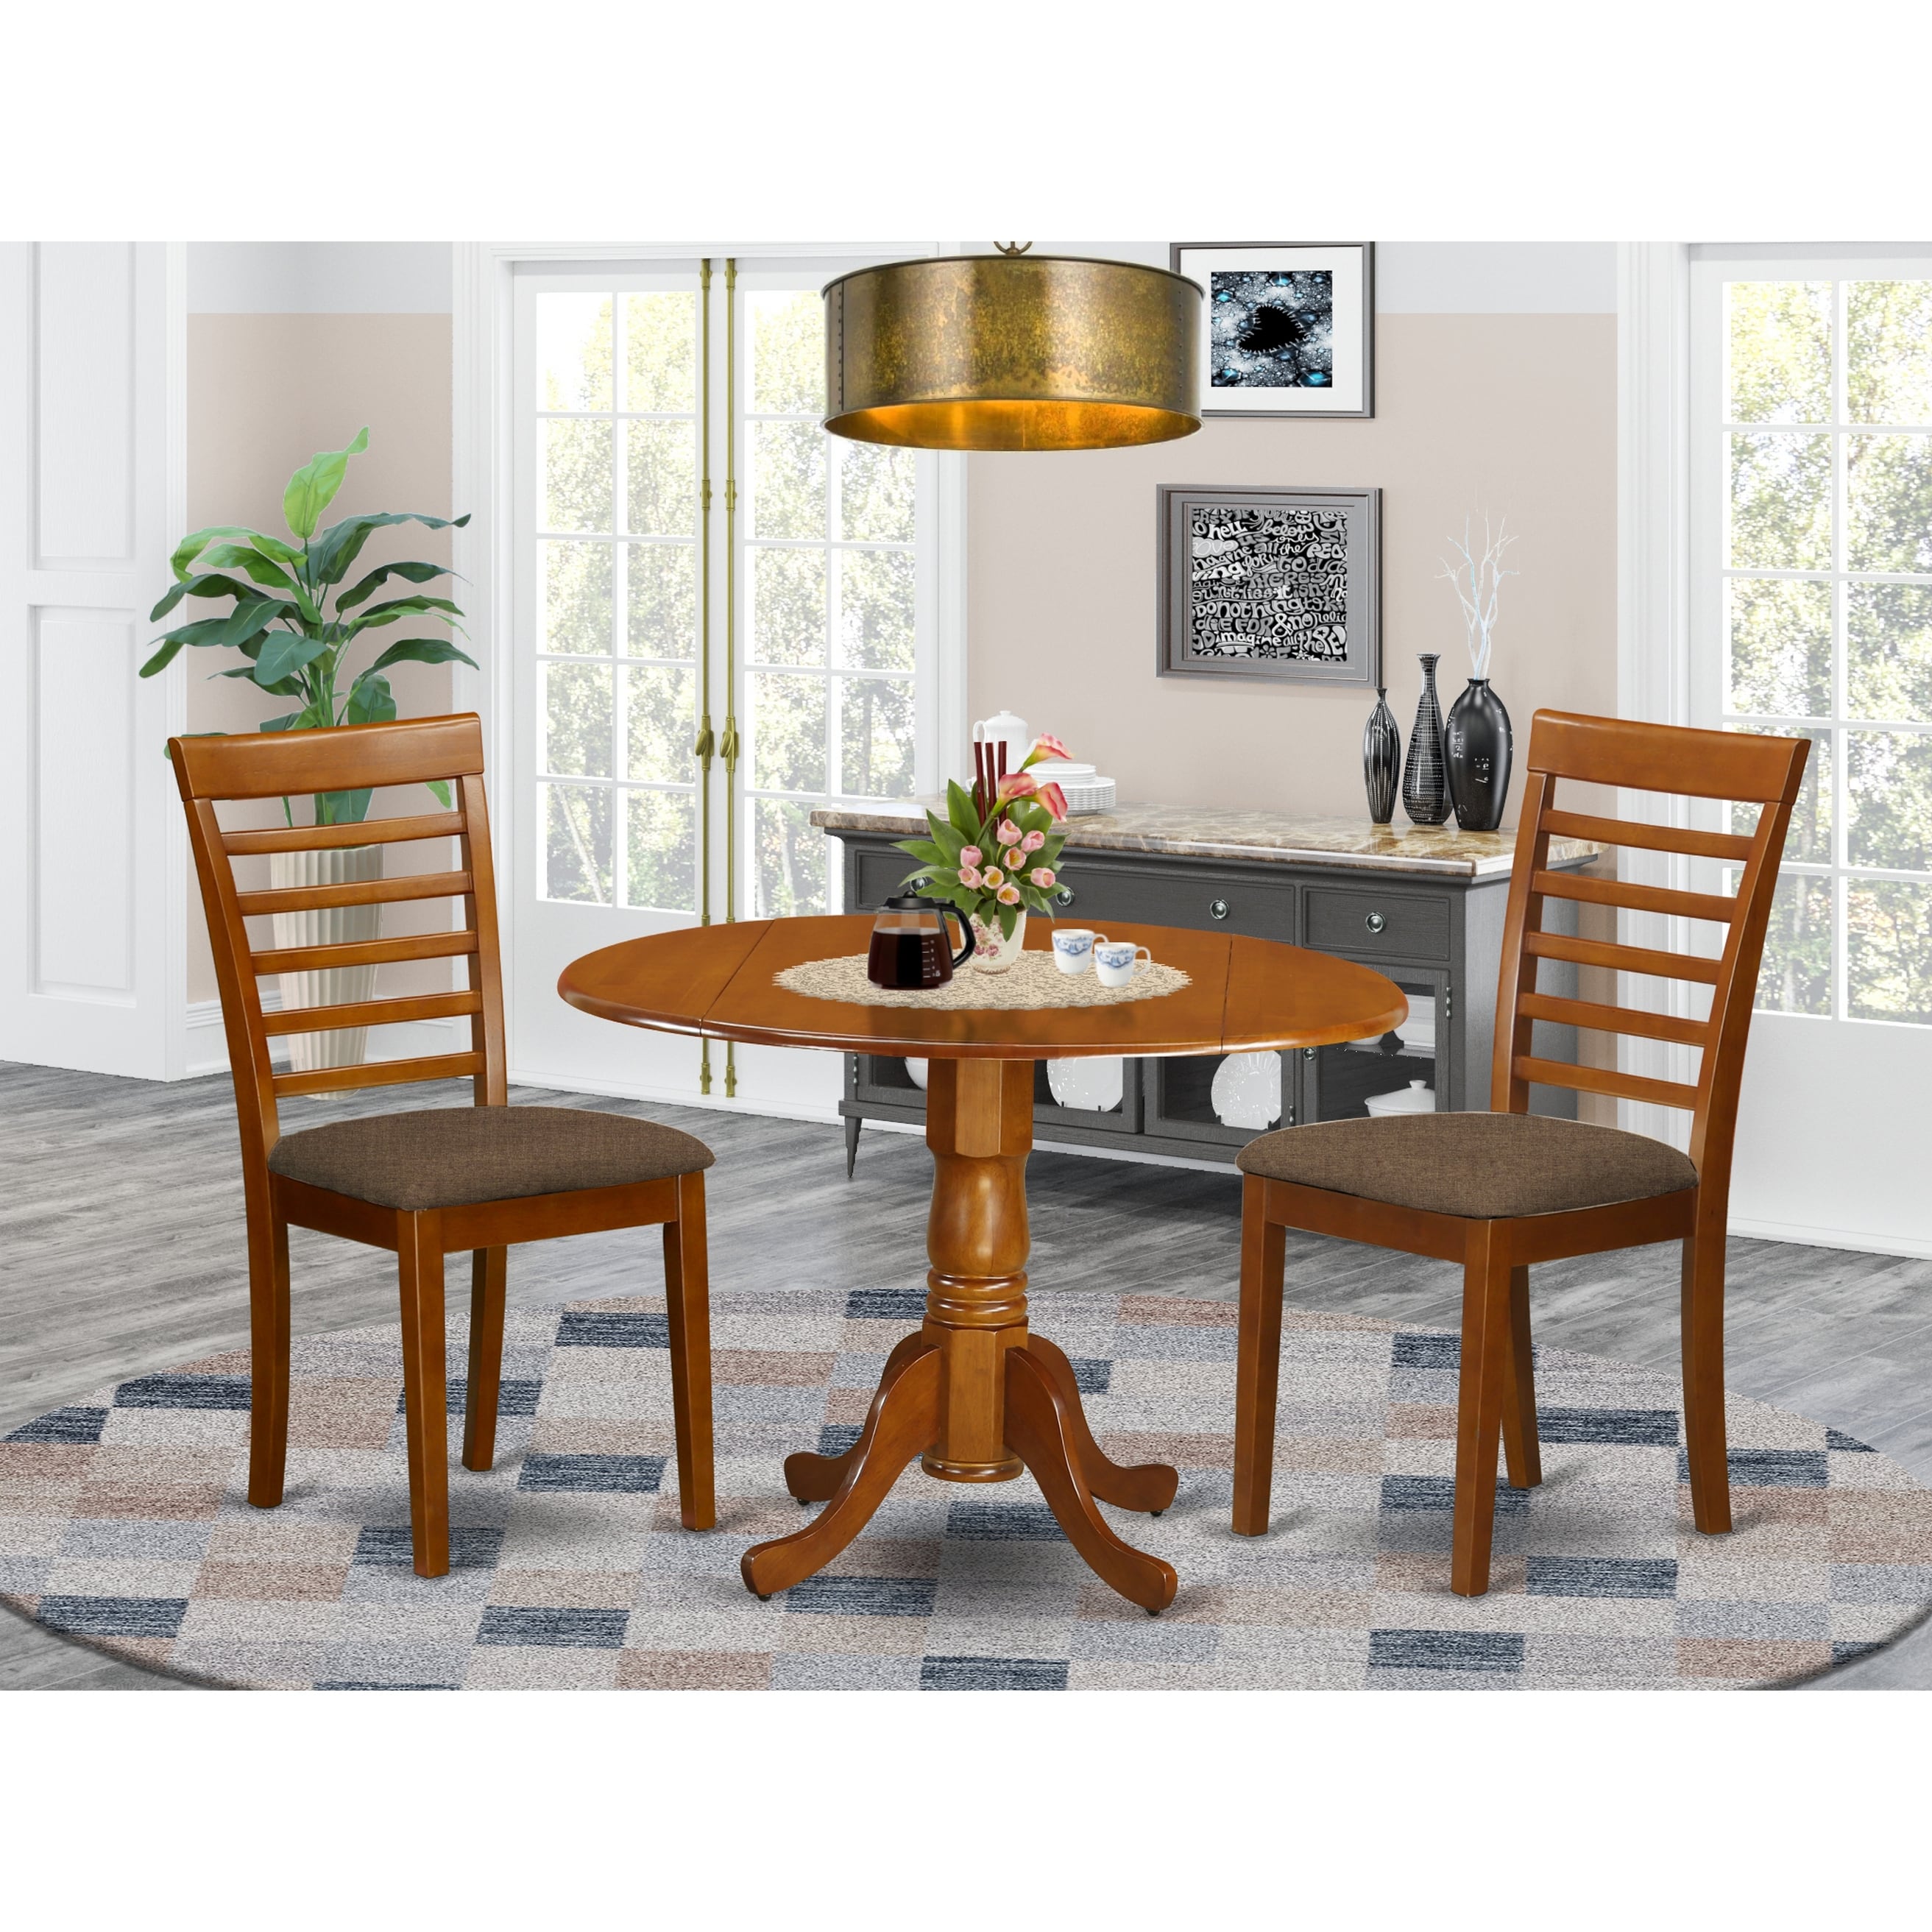 Saddle Brown Small Kitchen Table And 2 Chairs Dining Set Overstock 10201097